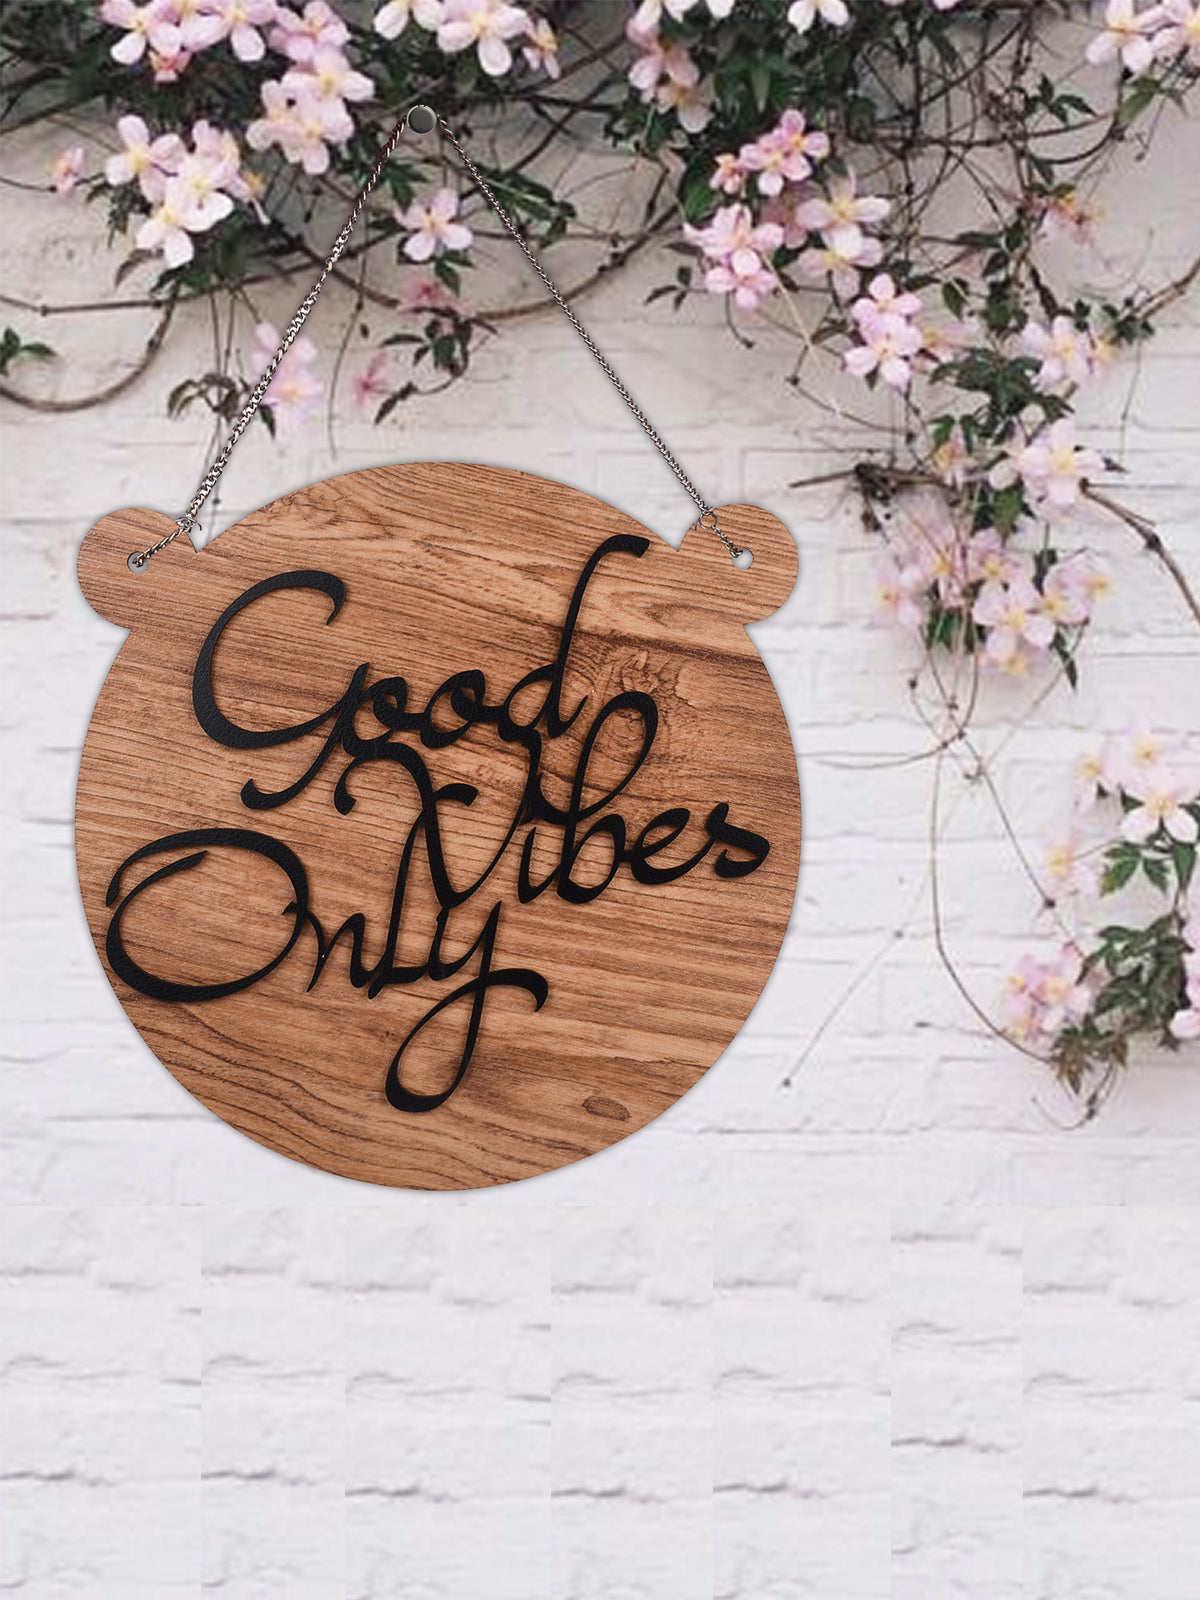 Good Vibes Only Round with Ear Wooden Wall Hanging